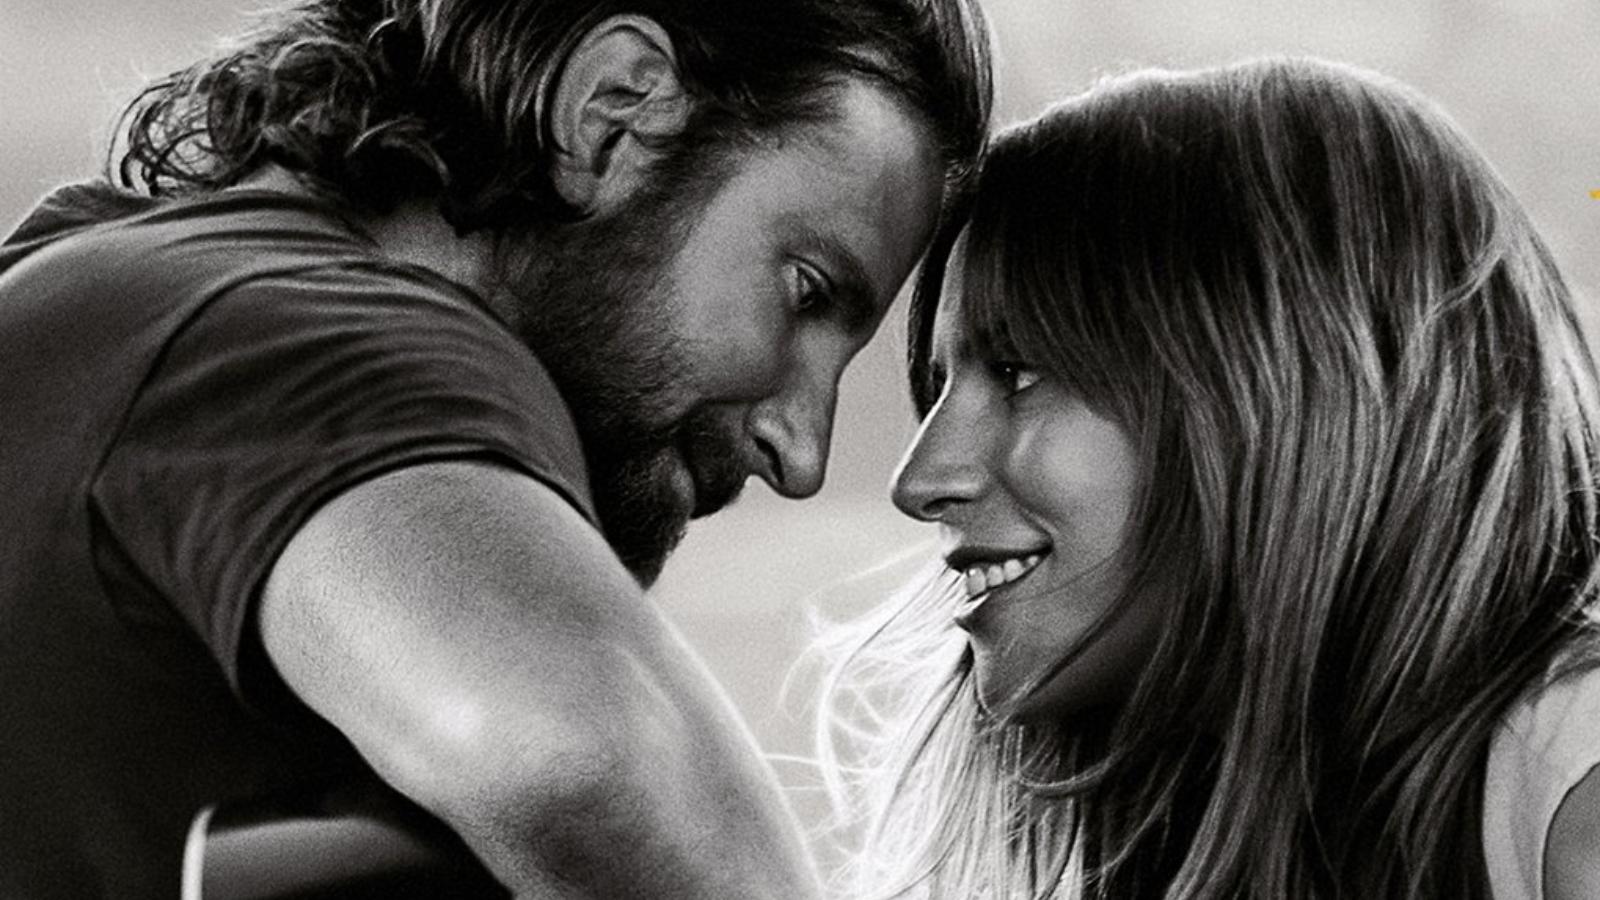 🔥 Download A Star Is Born Movie Re Bradley Cooper S Debut By Hollyc76 A Star Is Born 